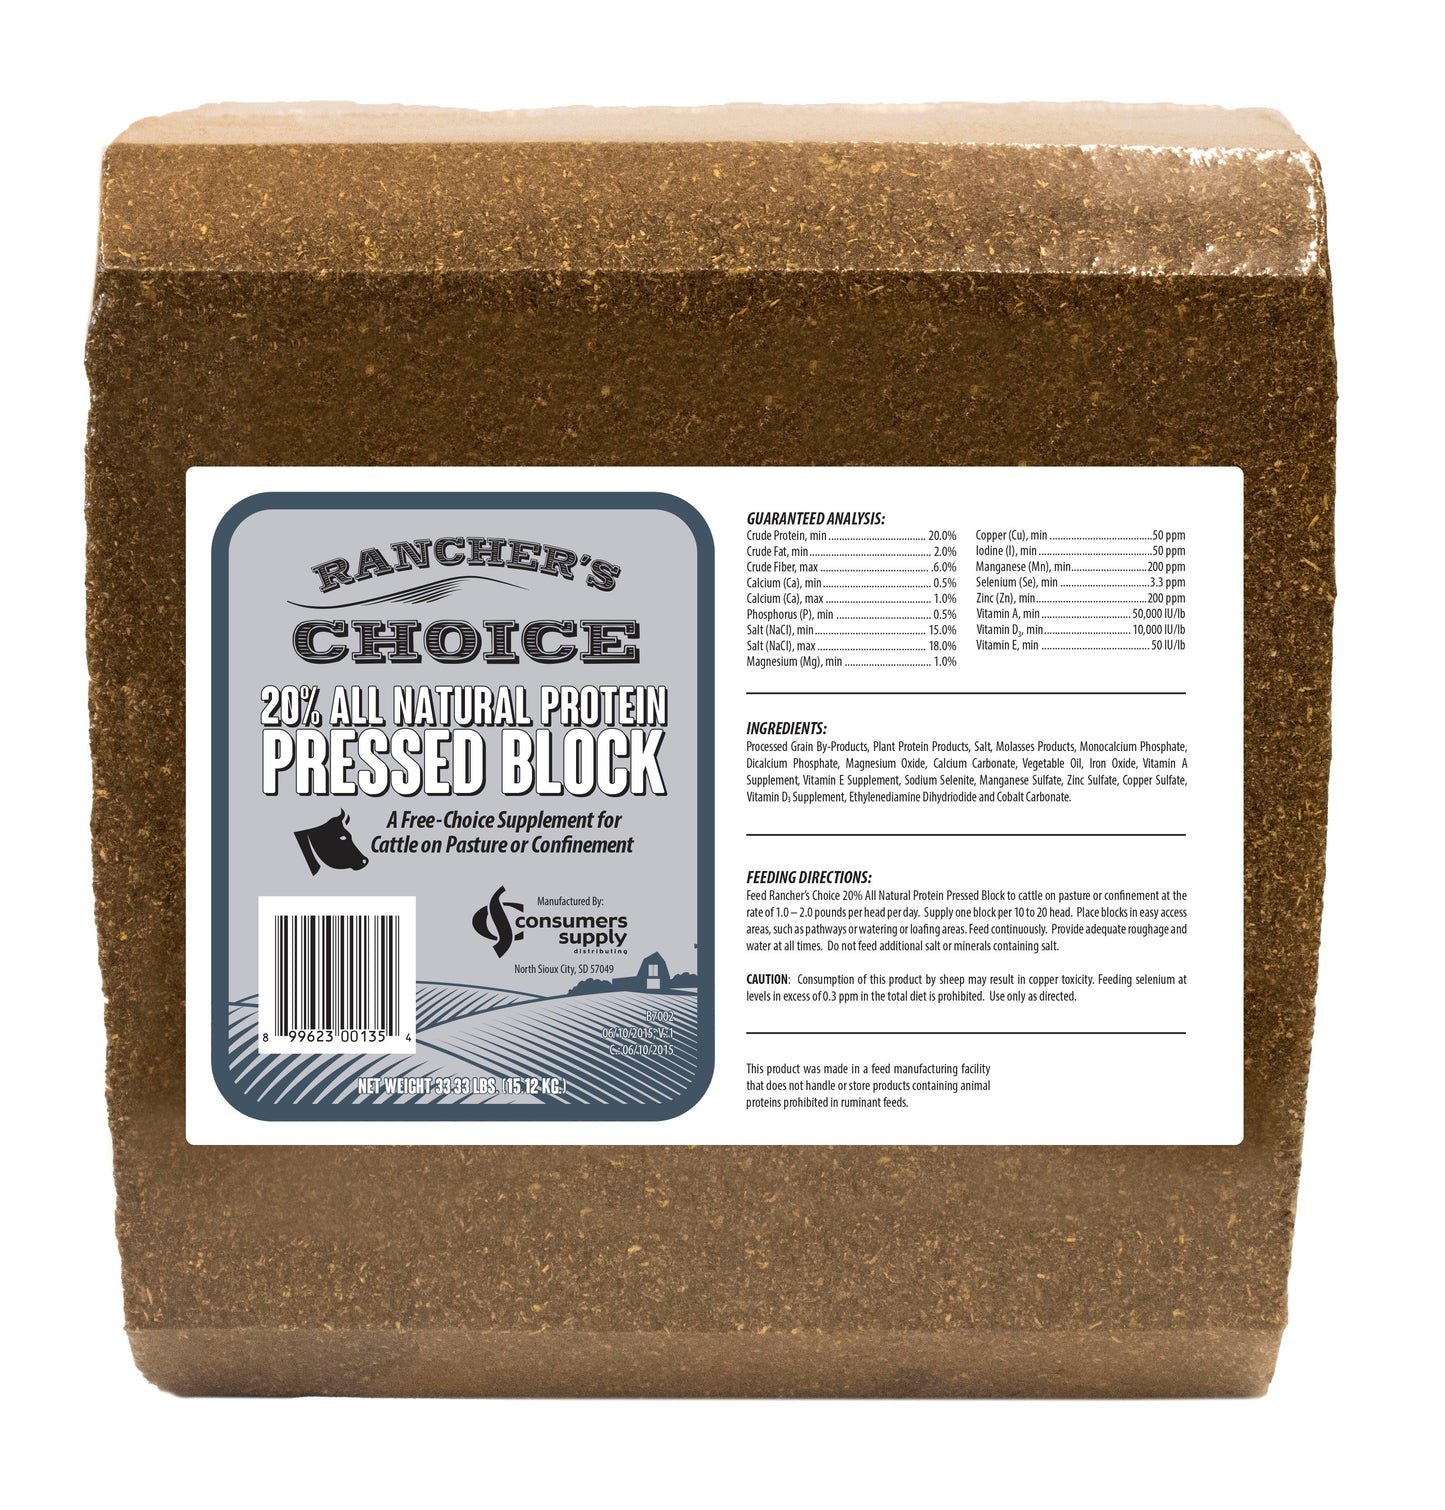 Rancher's Choice® 20% All Natural Pressed Block